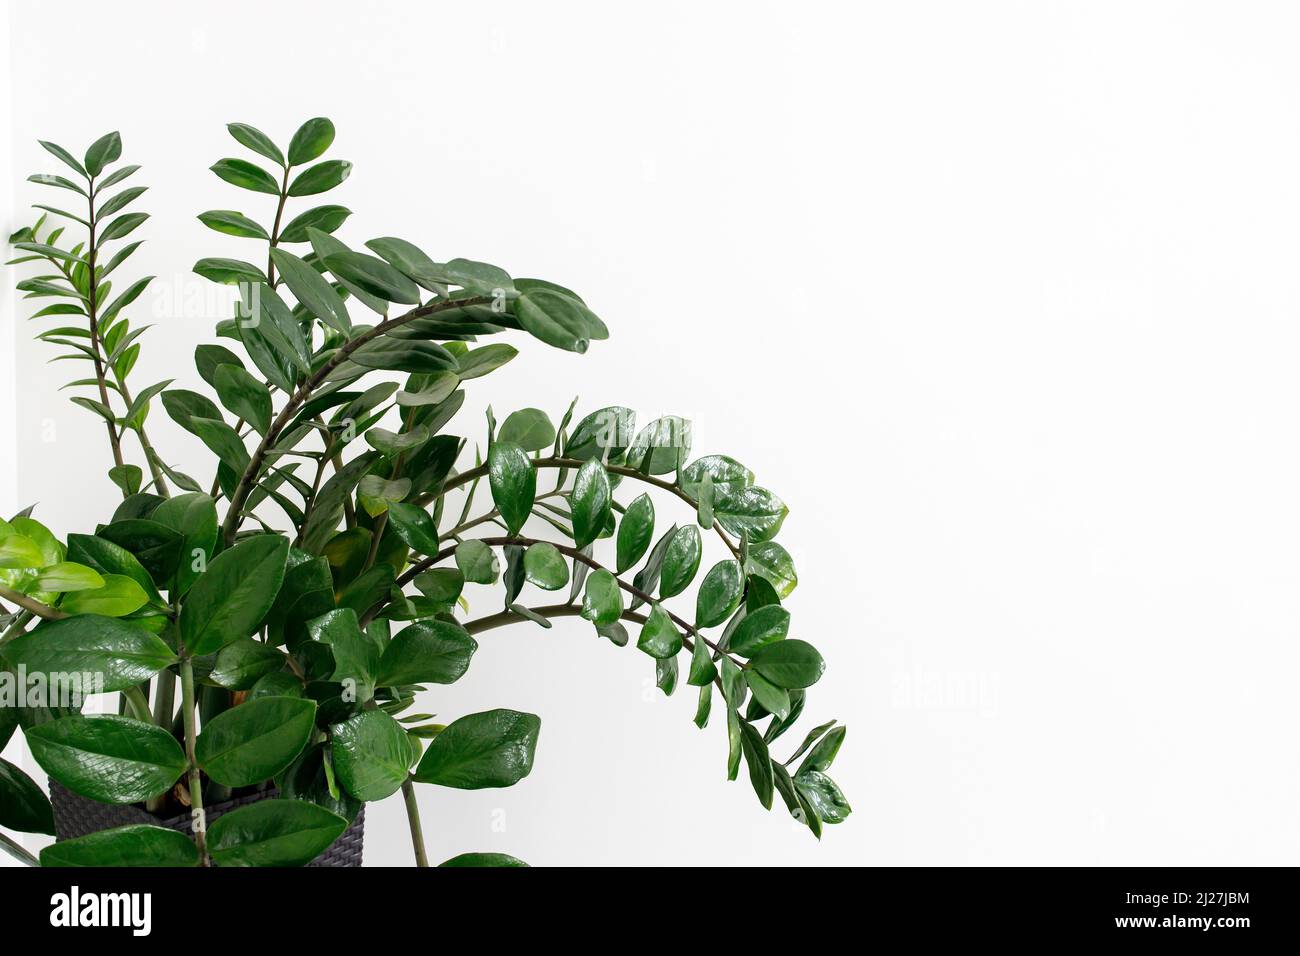 Zamioculcas plant. Fragment of a plant and a fresh shoot against a white wall Stock Photo